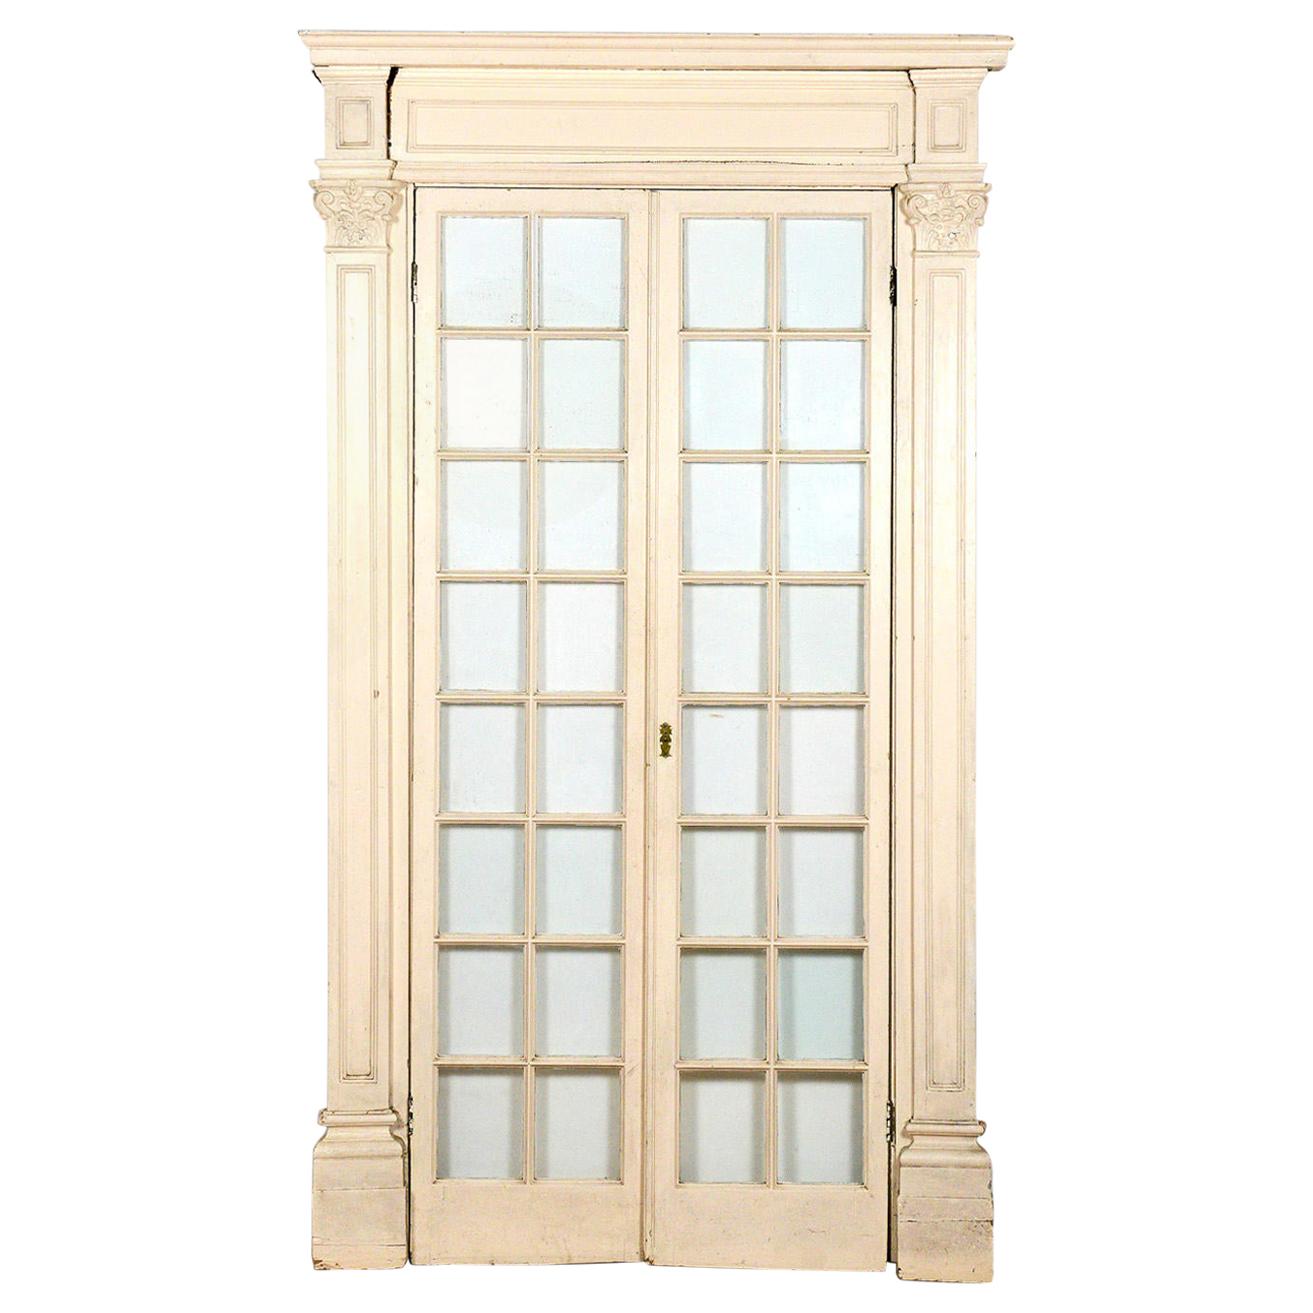 19th Century Glazed Doors in Decorative Surround For Sale